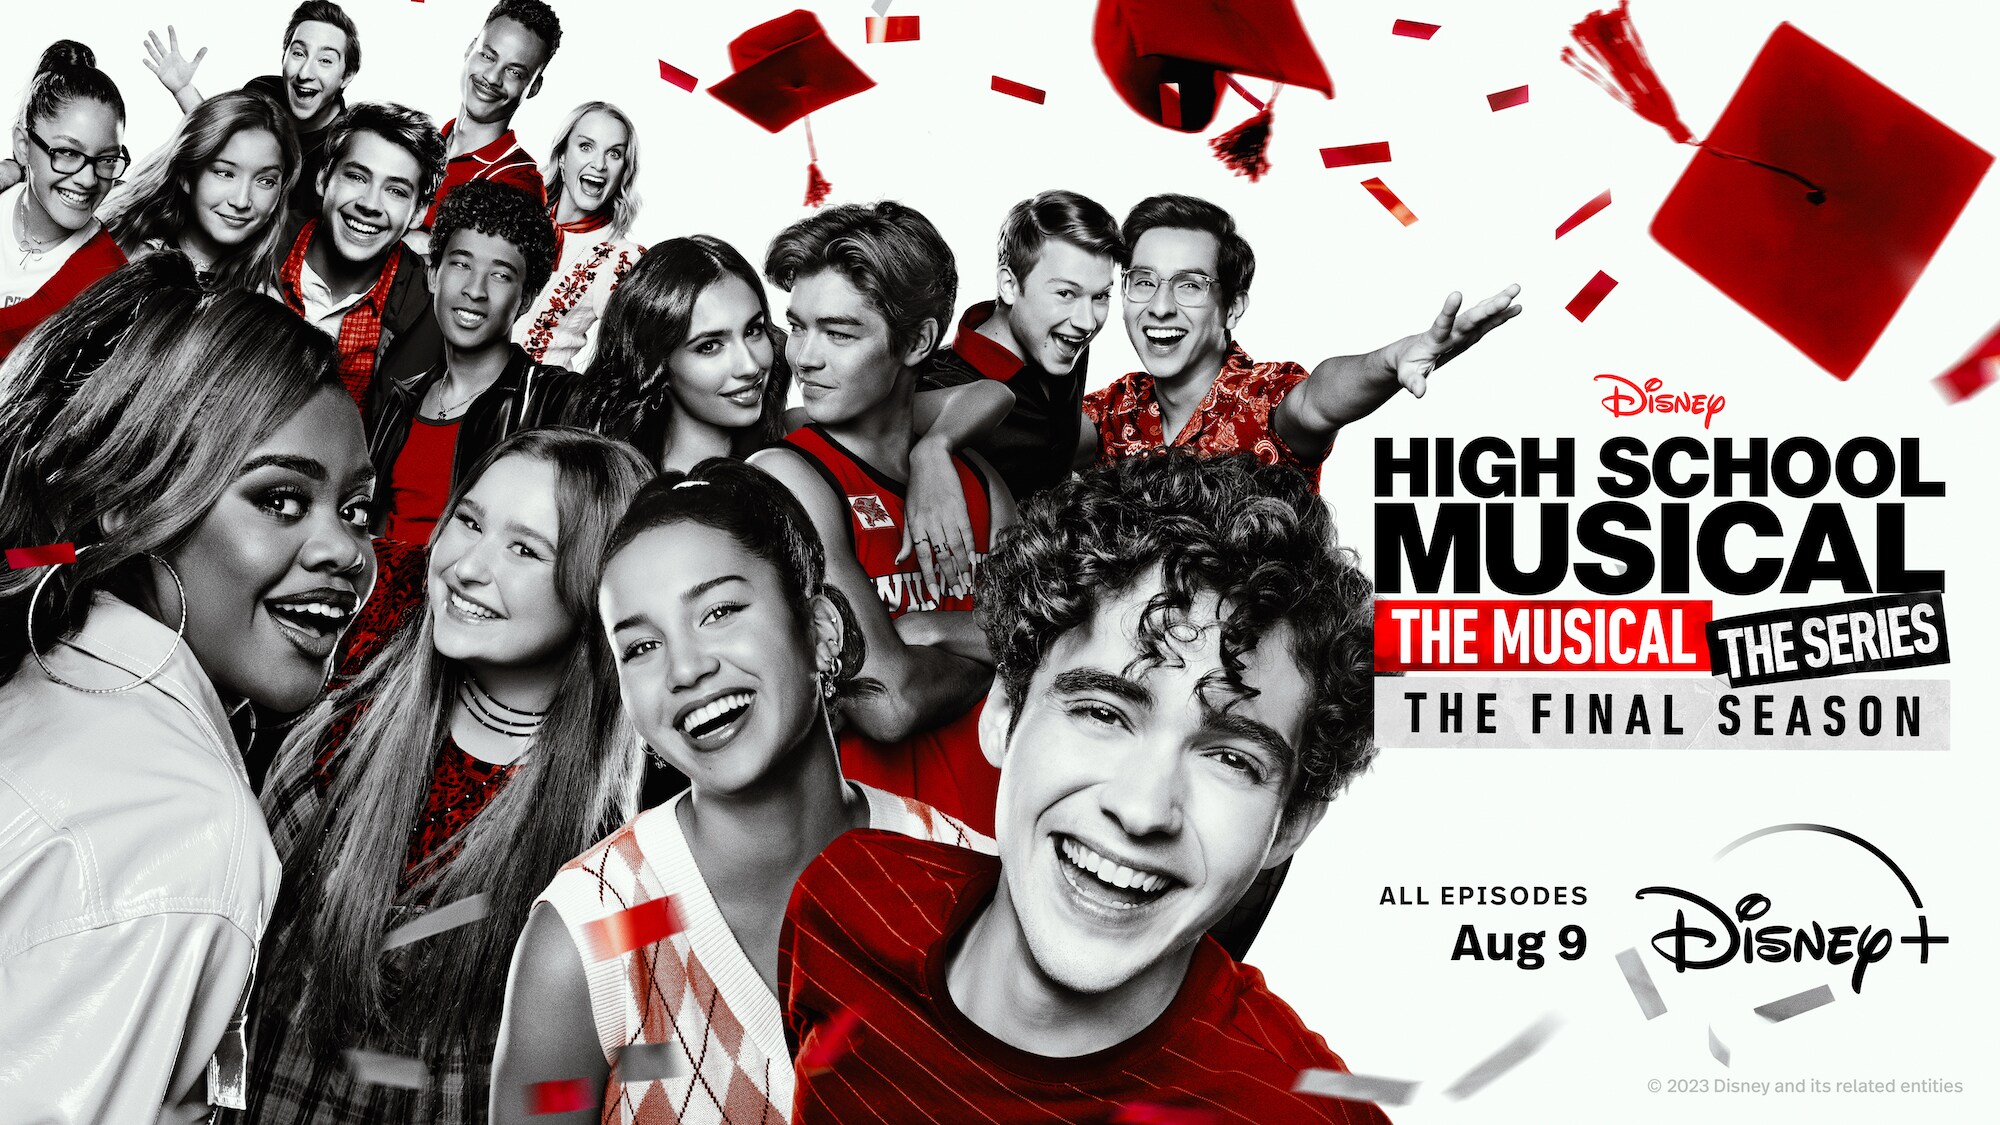 Highly School Of Or The It\'s Musical: The Press 9 Disney Series” August | Four Plus Premiere Disney+ Of Now “High Anticipated Trailer Reveals Never! Official Season Musical: Ahead